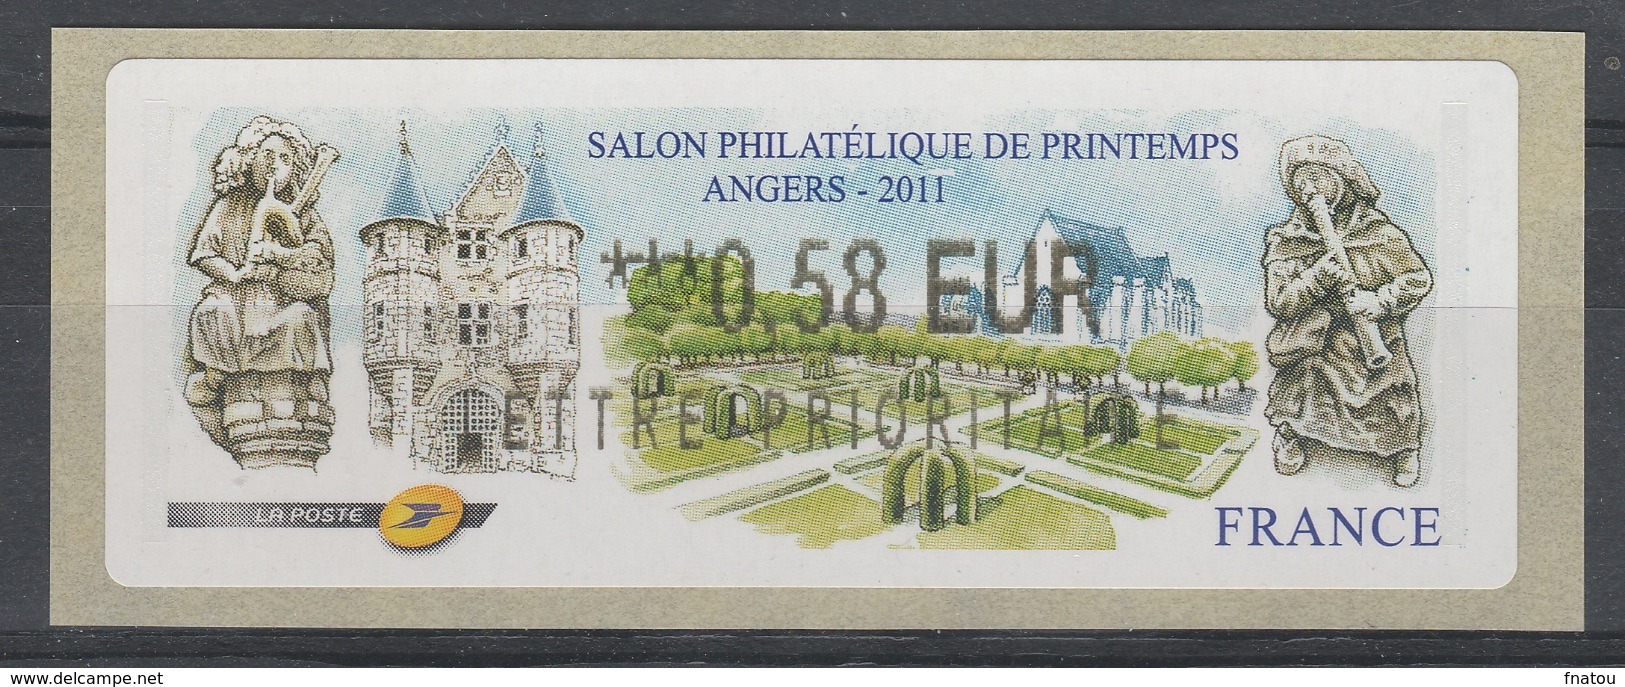 France, ATM Label, Philatelic Exhibition Angers, 2011, 0,58€, MNH VF - Unused Stamps